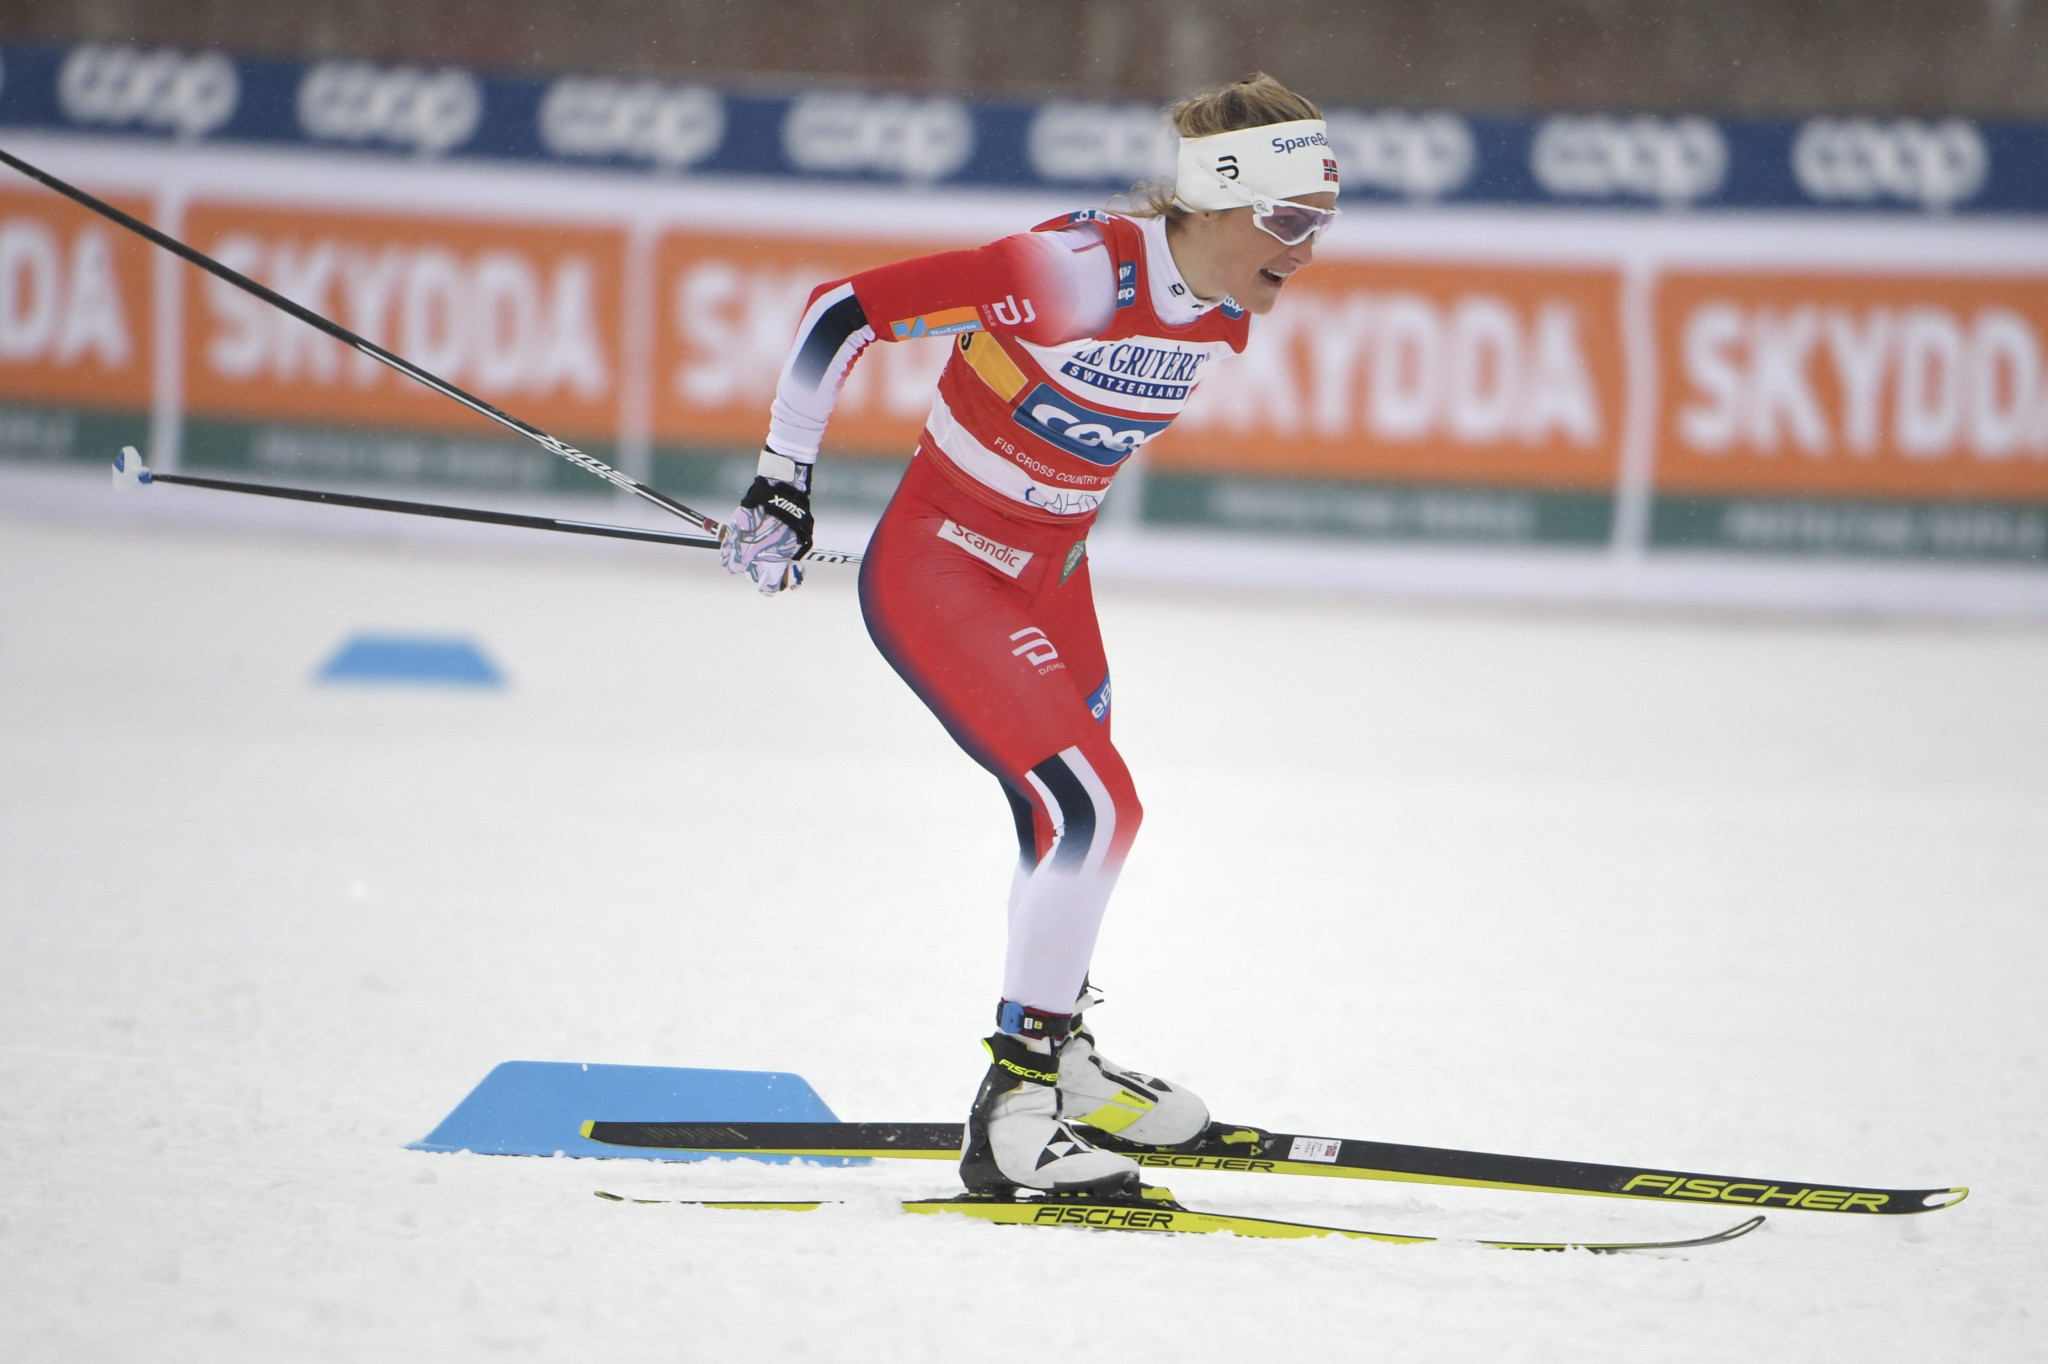 Therese Johaug could seal the overall women's title at the International Ski Federation Cross-Country World Cup tomorrow ©Getty Images